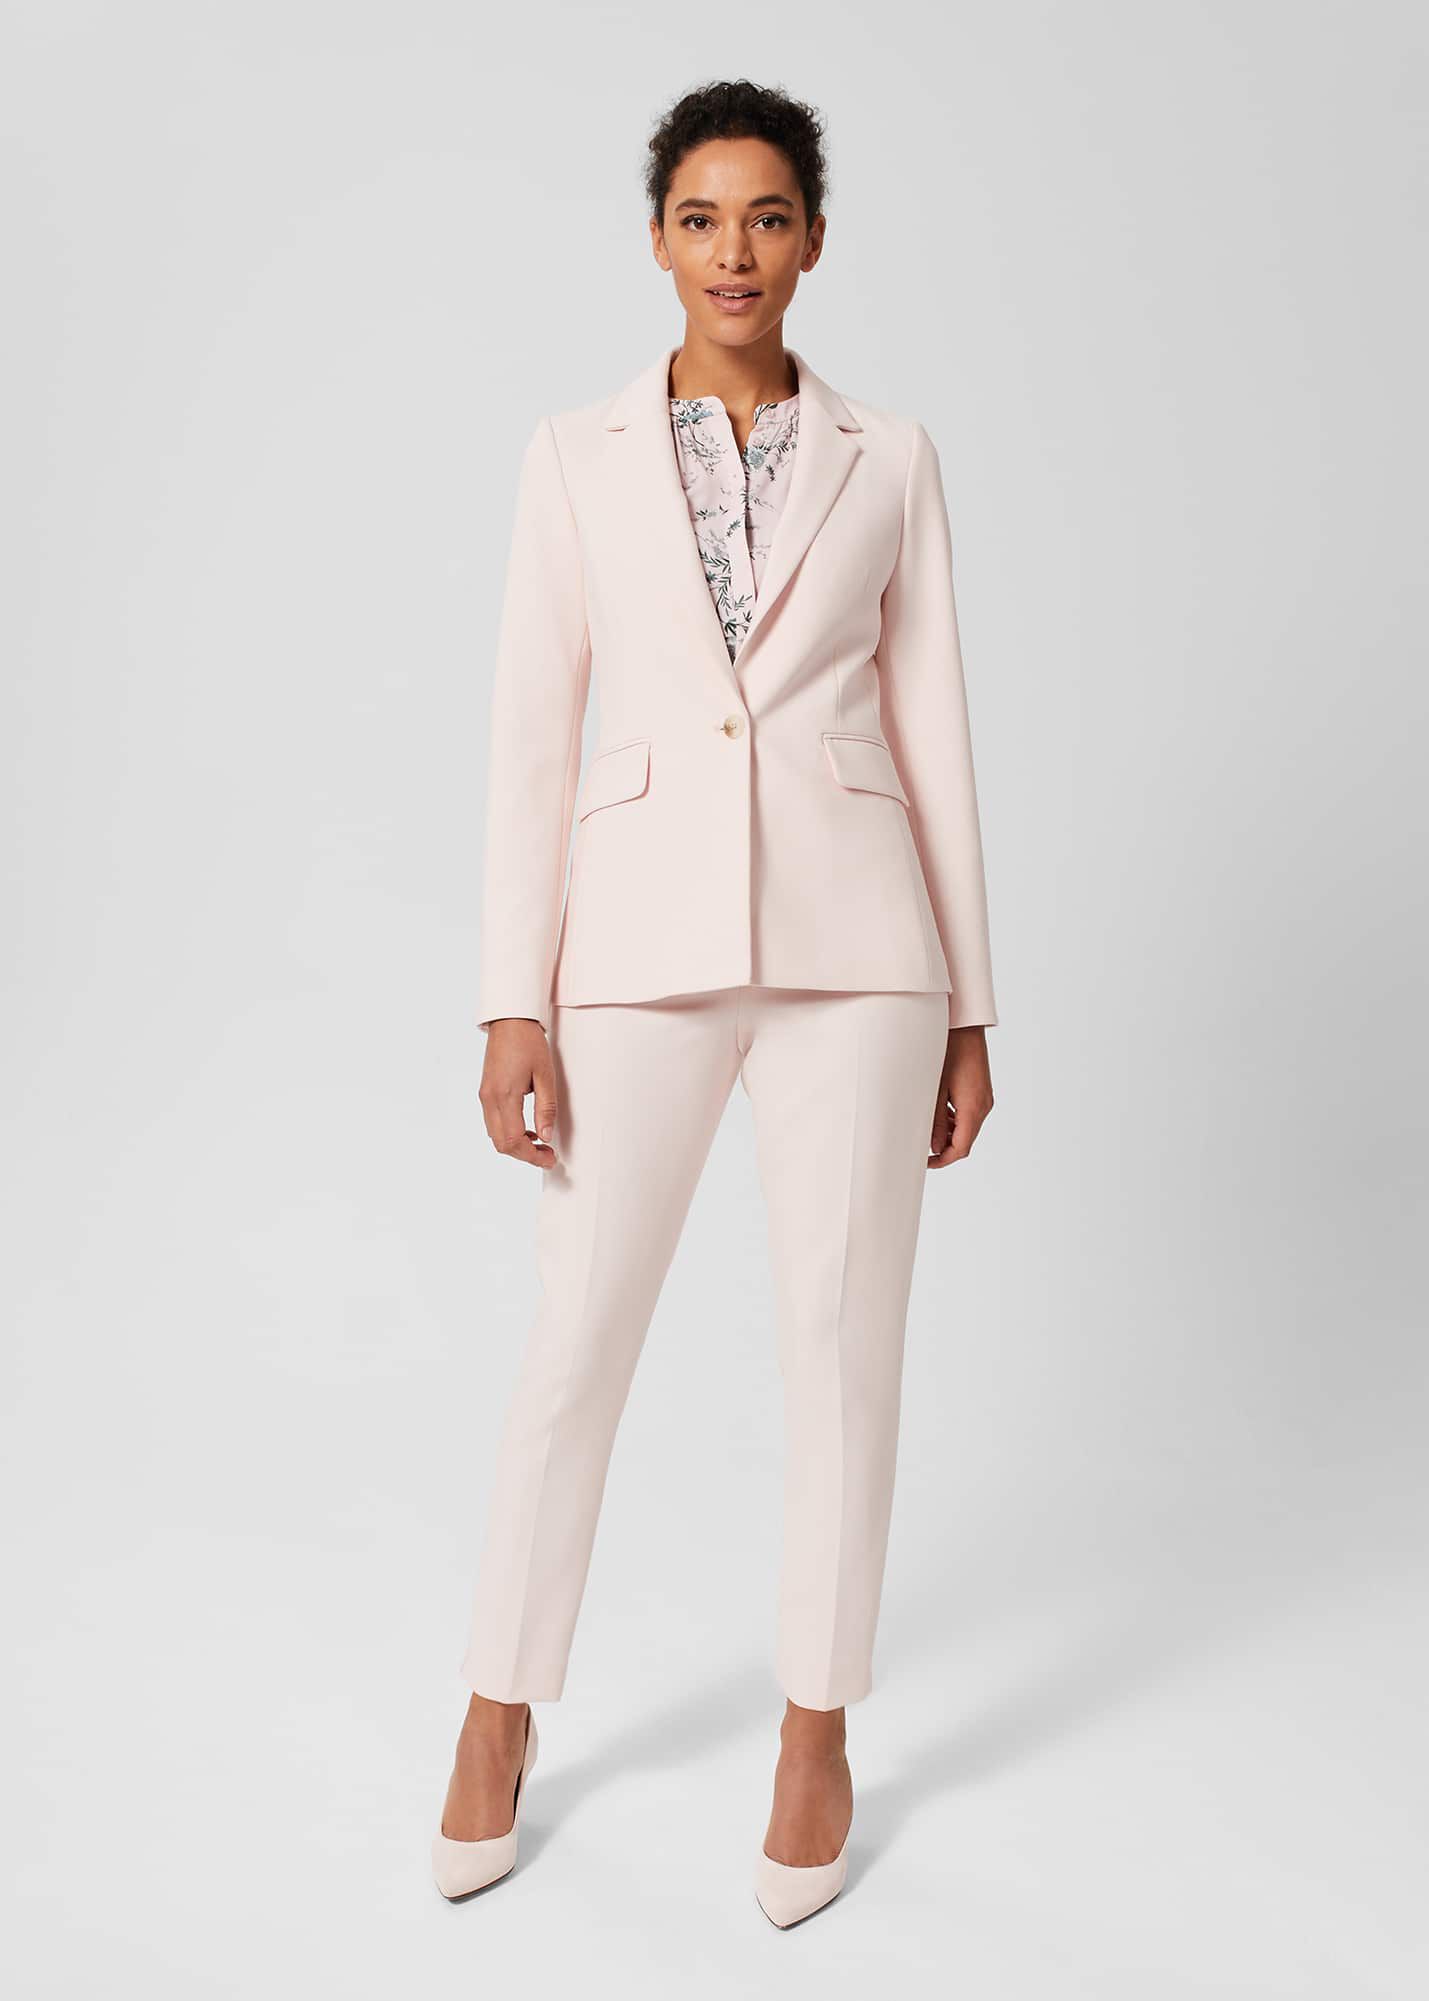 ASOS LUXE suit blazer and trouser in light pink | ASOS